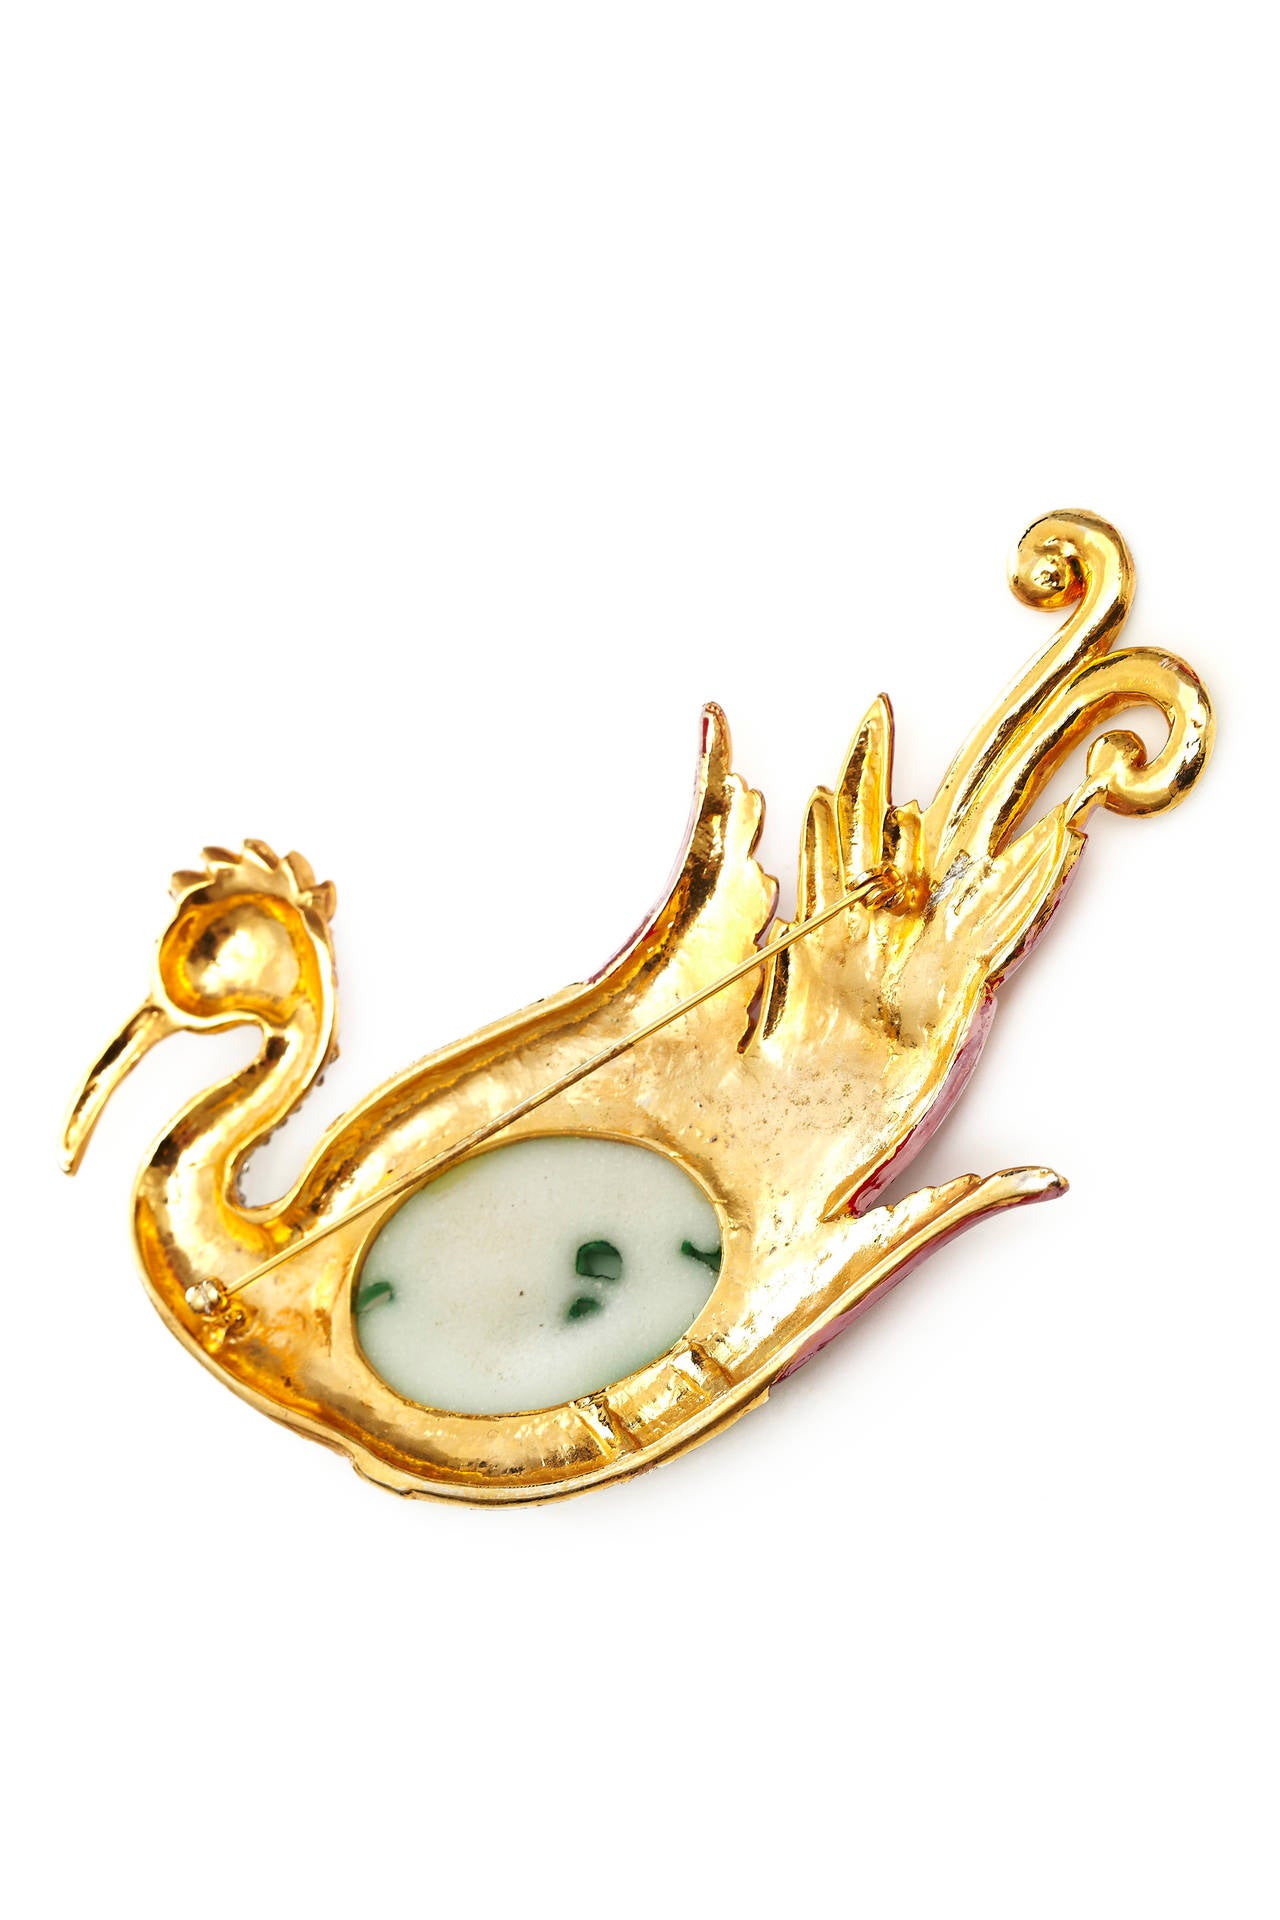 This magnificent vintage Crown Trifari swan brooch is a real show-stopper and a reproduction piece from the iconic and extremely rare Ming collection originally produced in the 1940s.  It is gold tone, painted in a variety of pinks with a central